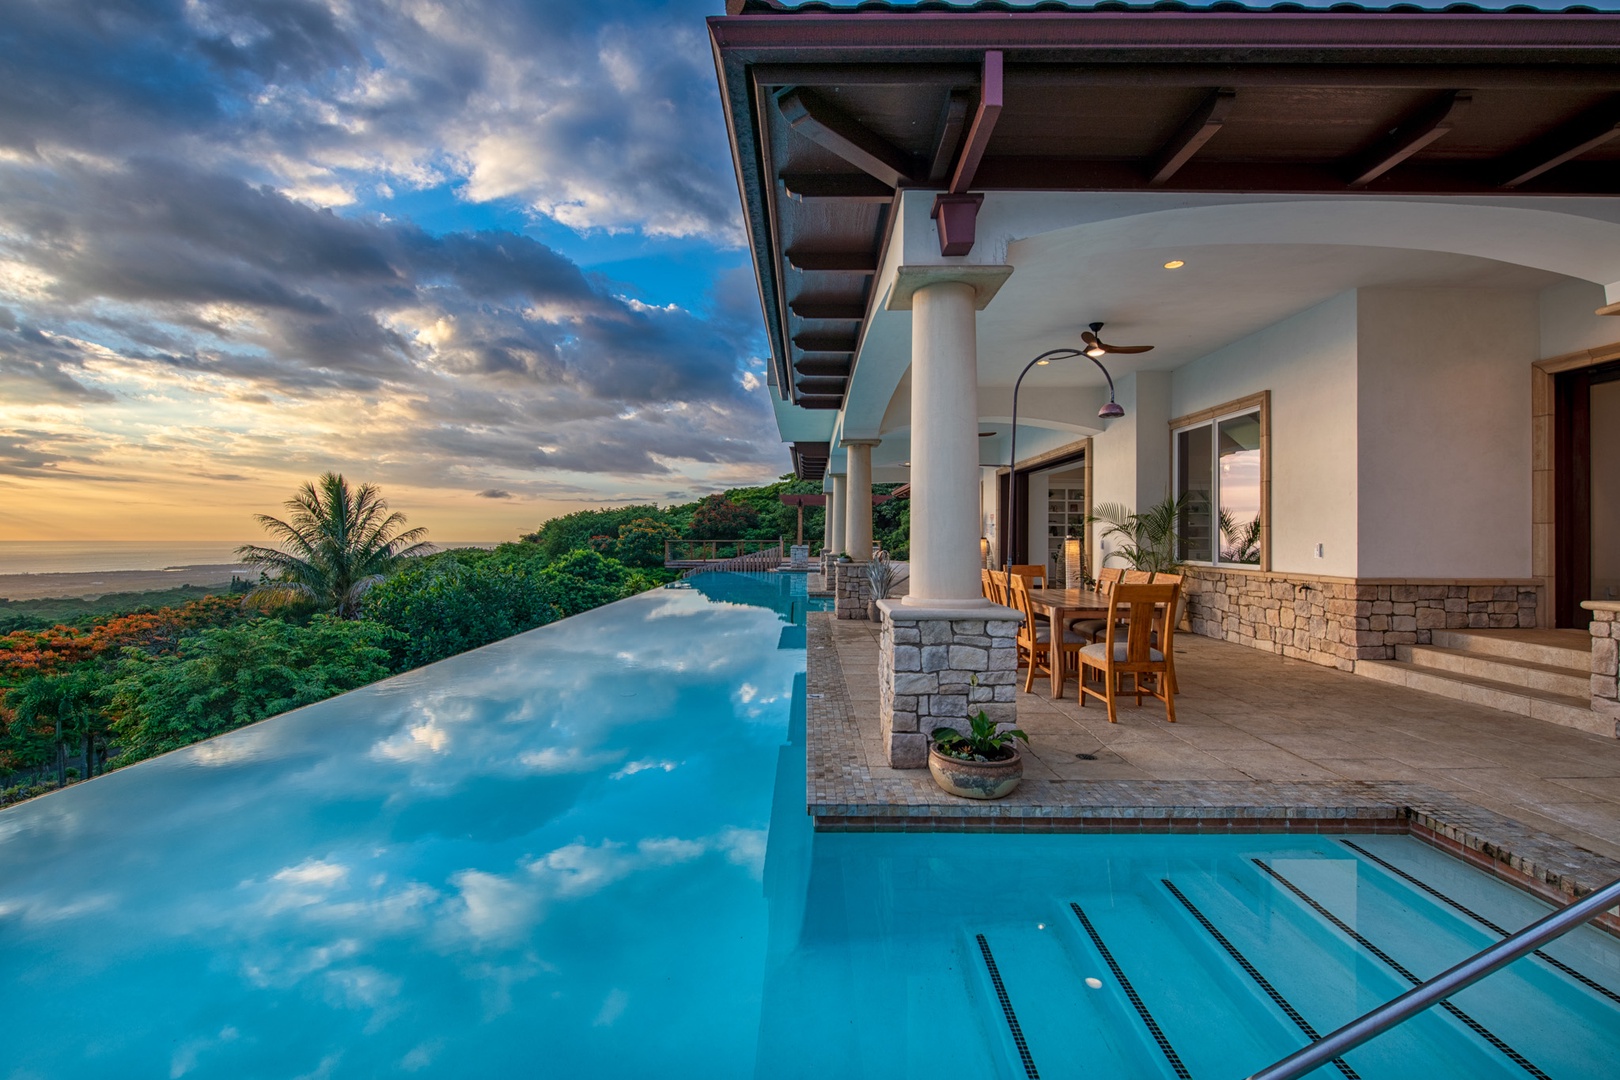 Kailua Kona Vacation Rentals, Kailua Kona Estate** - Nothing beats an sunset dip in the pool at the end of the day.